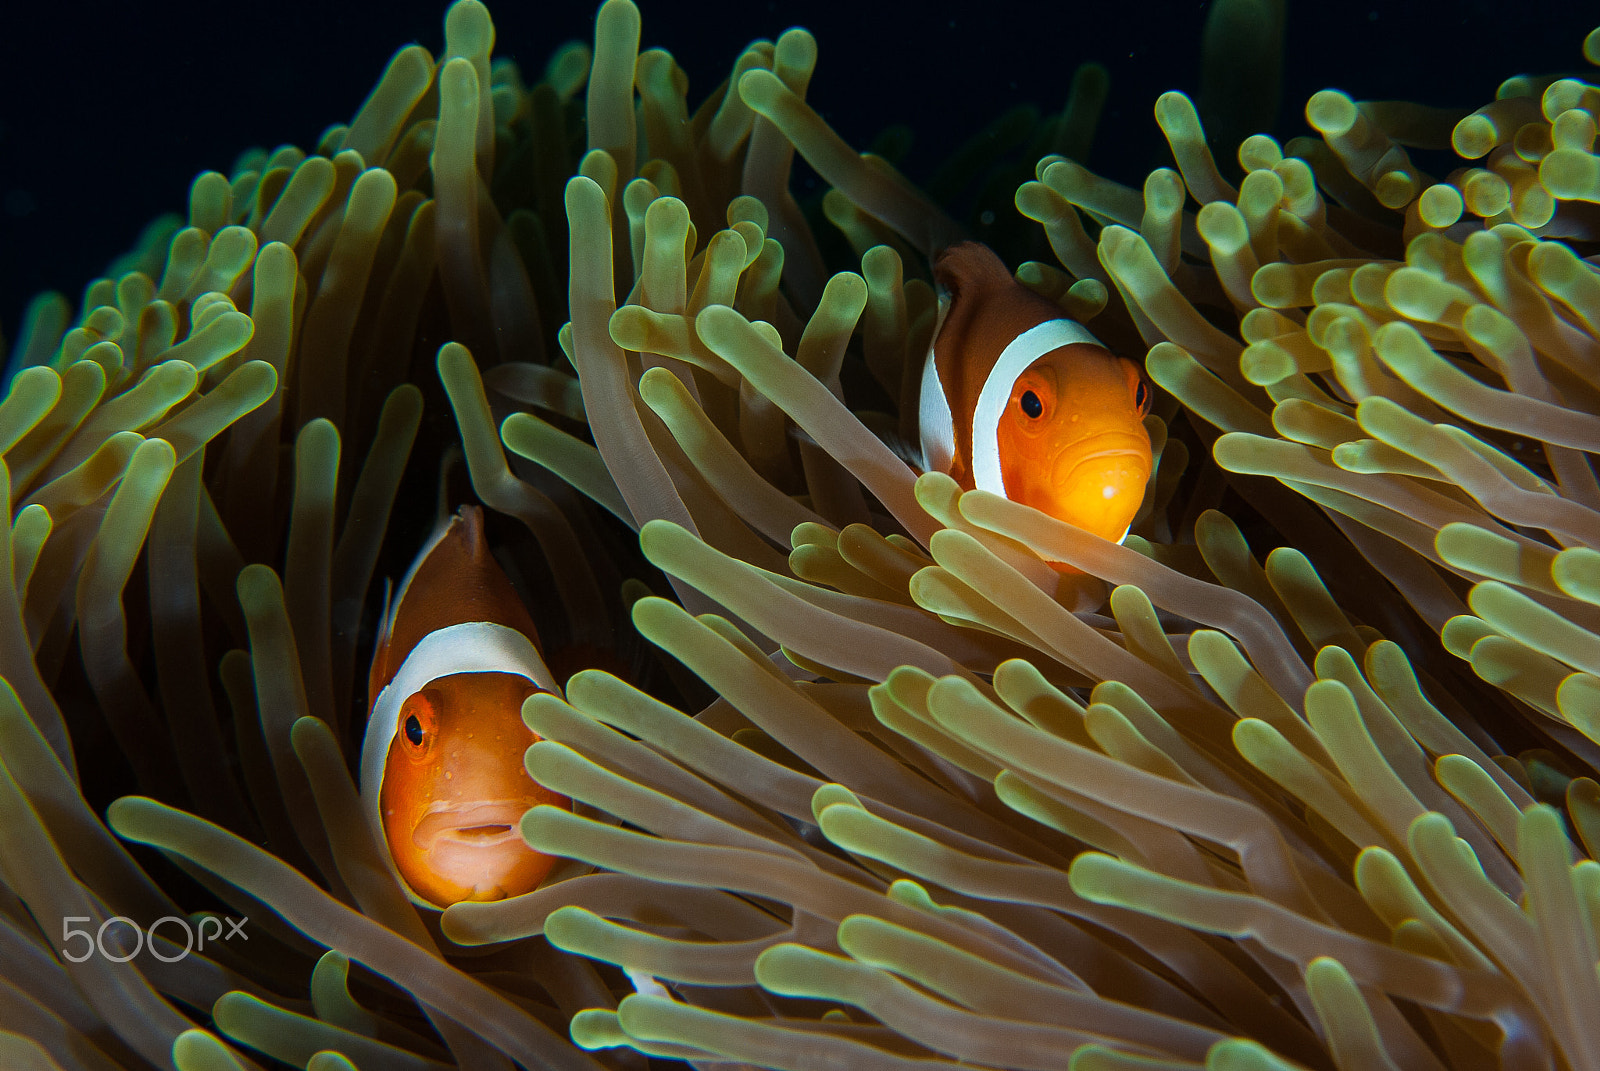 Nikon D200 sample photo. Two clownfish in their anemone photography